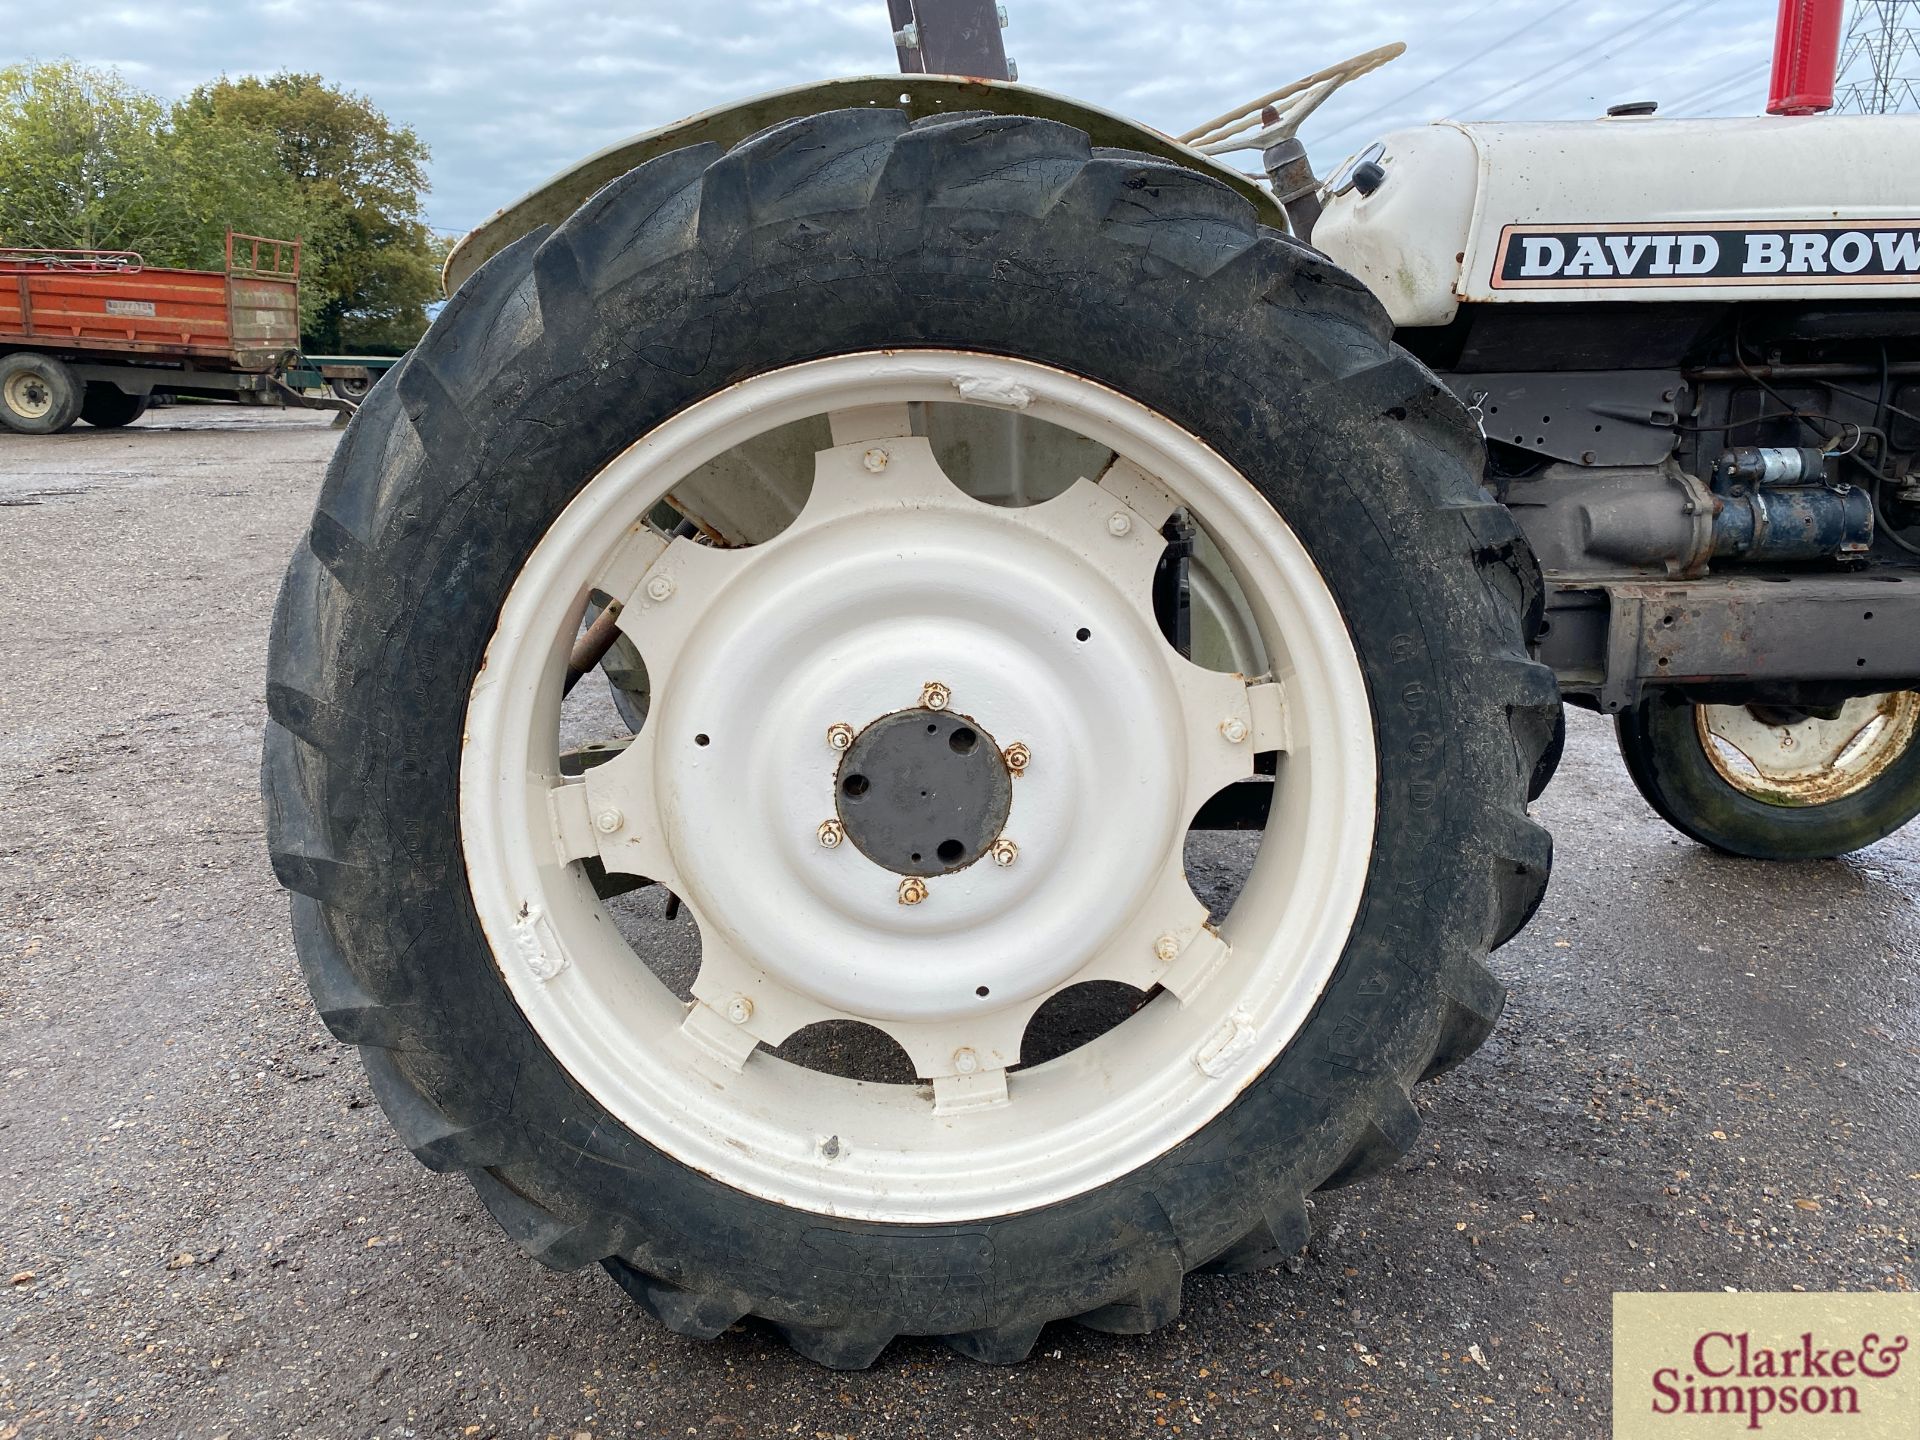 David Brown 990 Selectamatic 2WD tractor. Registration DUE 781D (no paperwork). Serial number 990A/ - Image 16 of 31